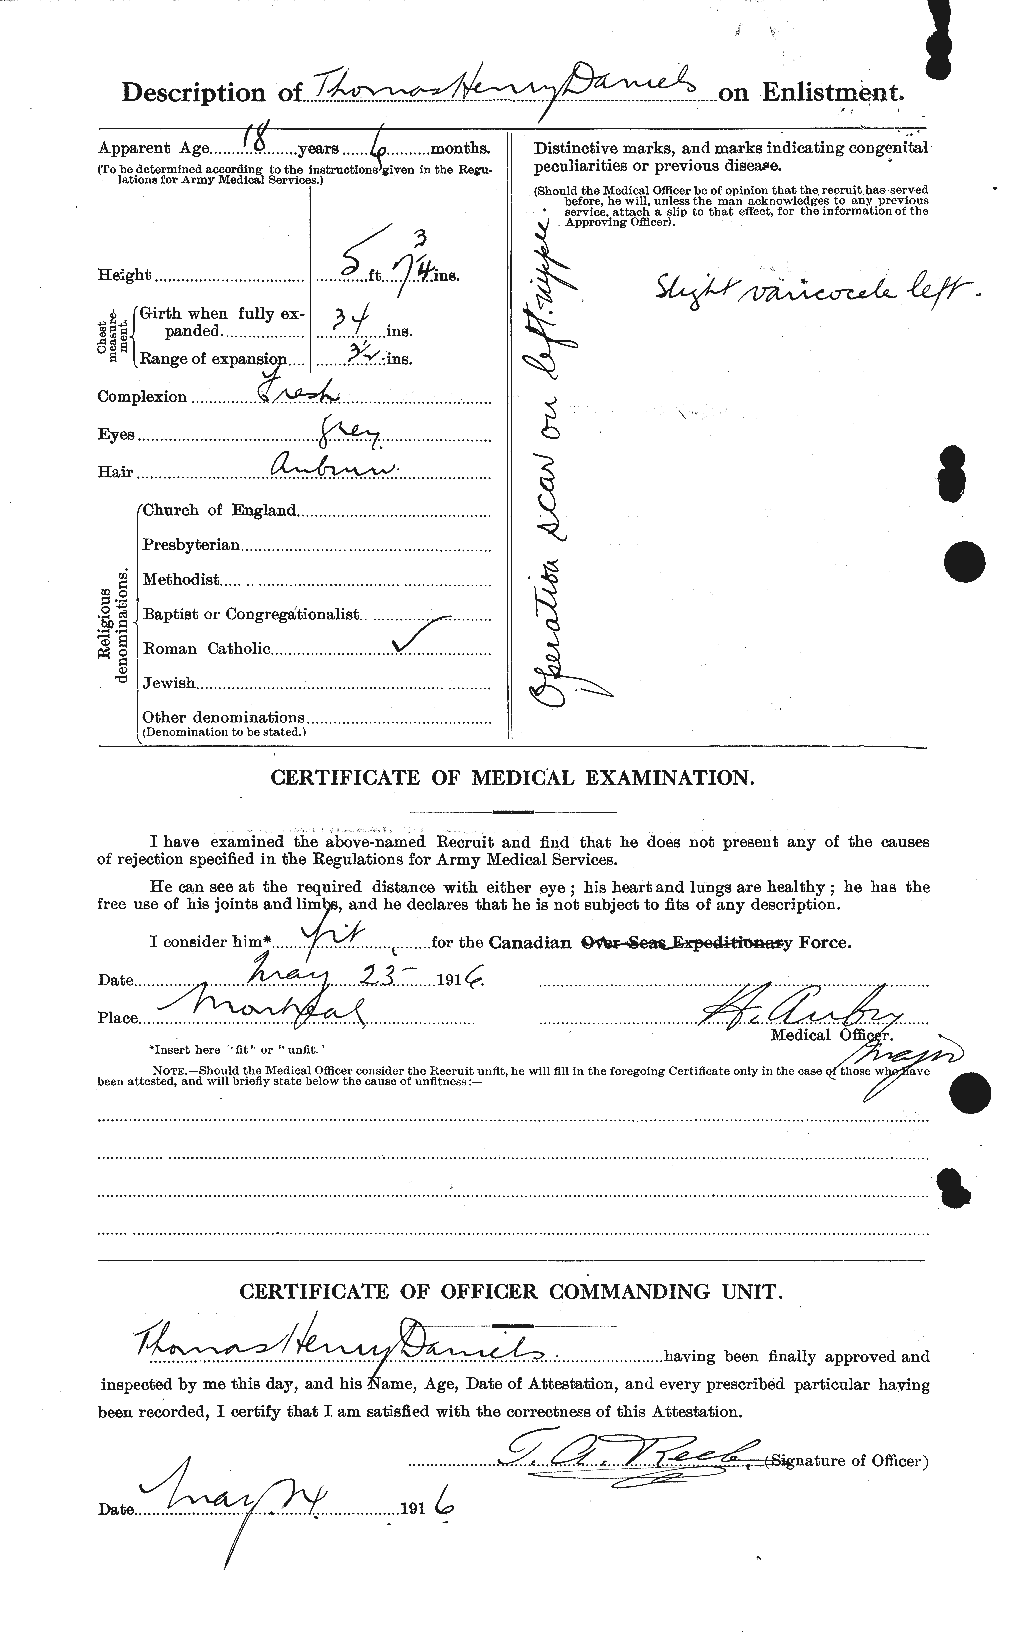 Personnel Records of the First World War - CEF 279678b